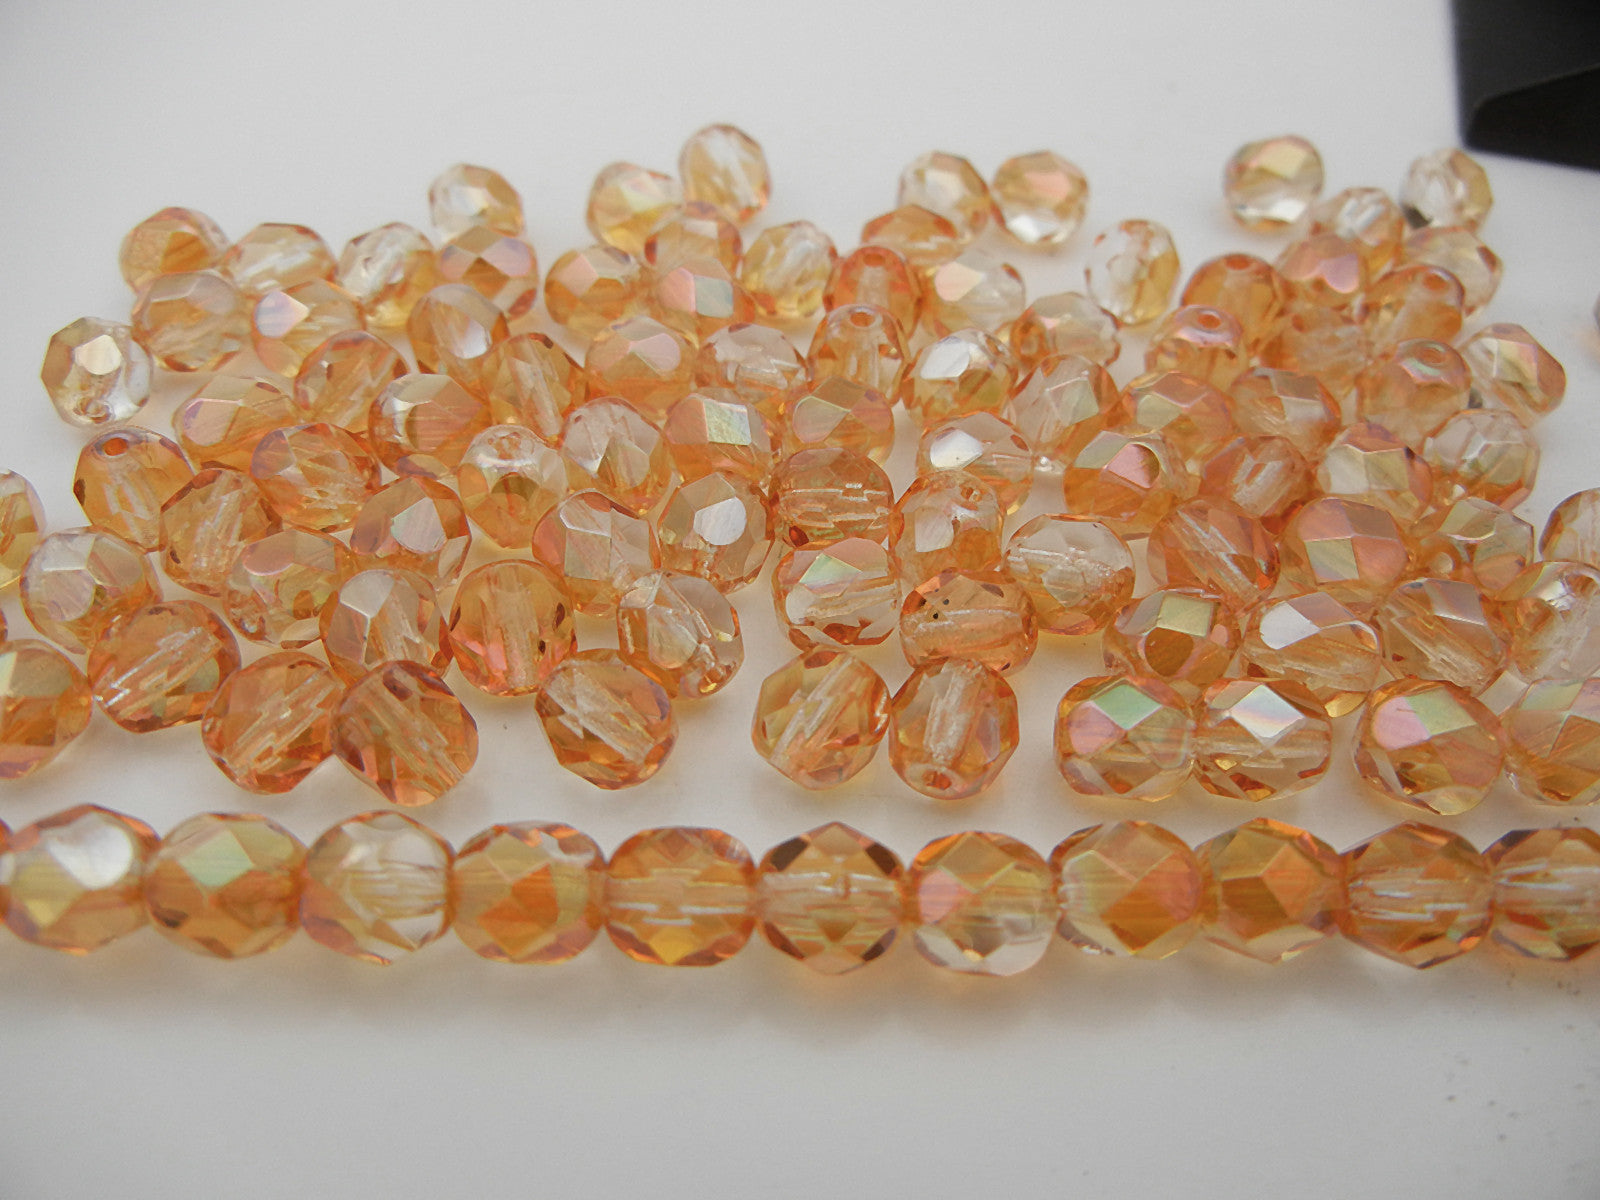 Crystal Apricot Medium, loose Czech Fire Polished Round Faceted Glass Beads